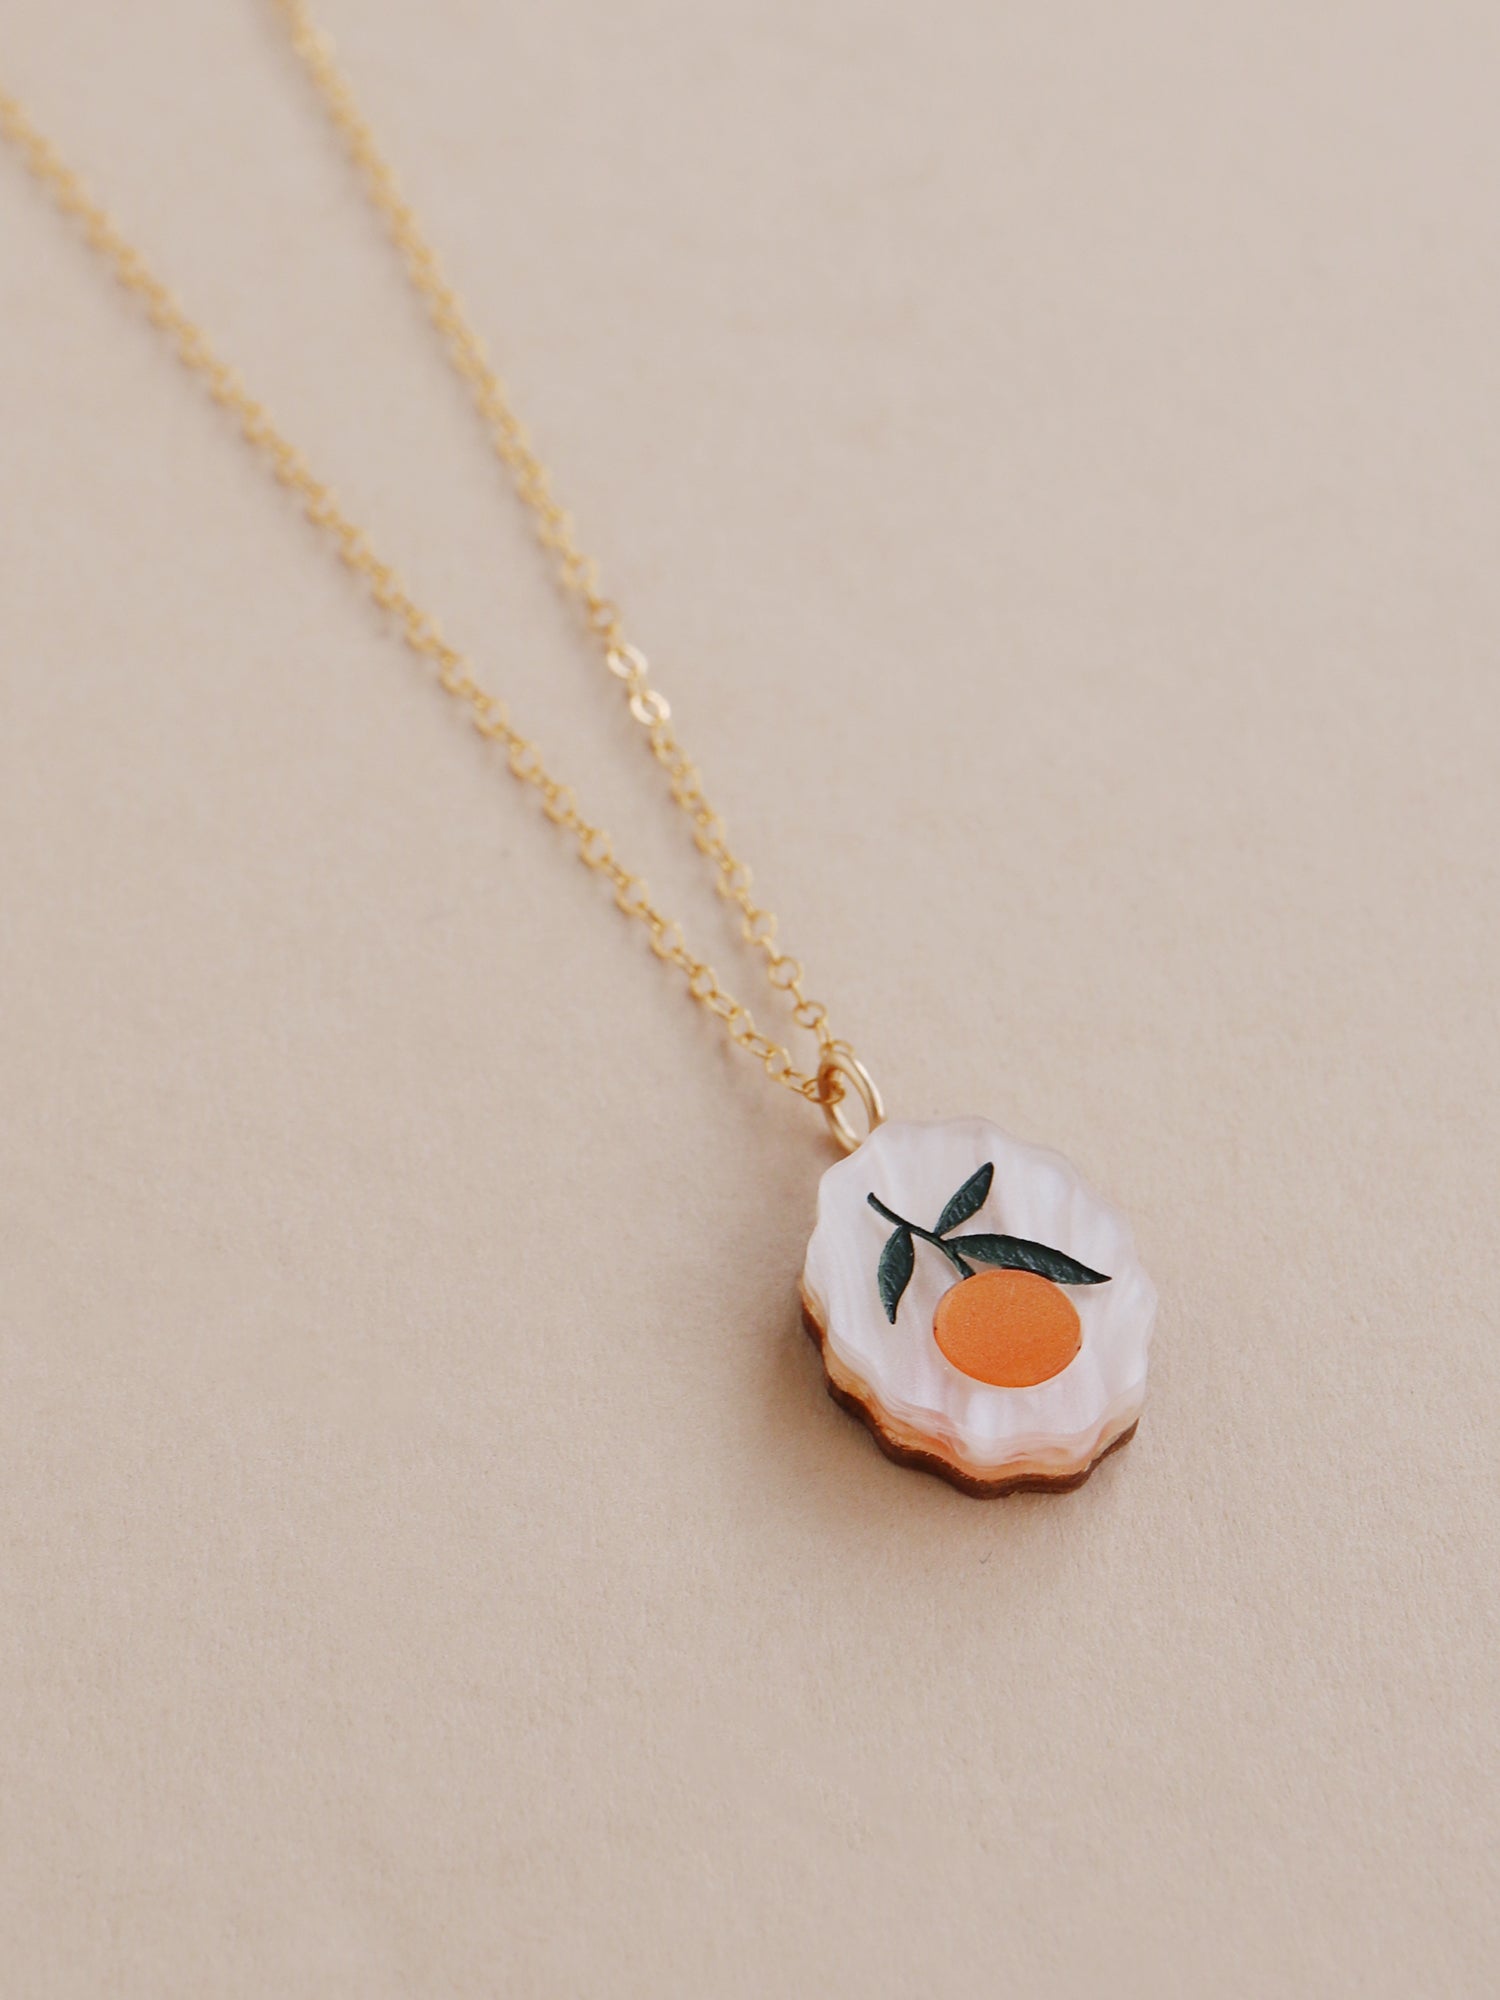 Orange charm necklace made from acrylic and a 14k gold-filled chain & findings. Handmade in the UK by Wolf & Moon